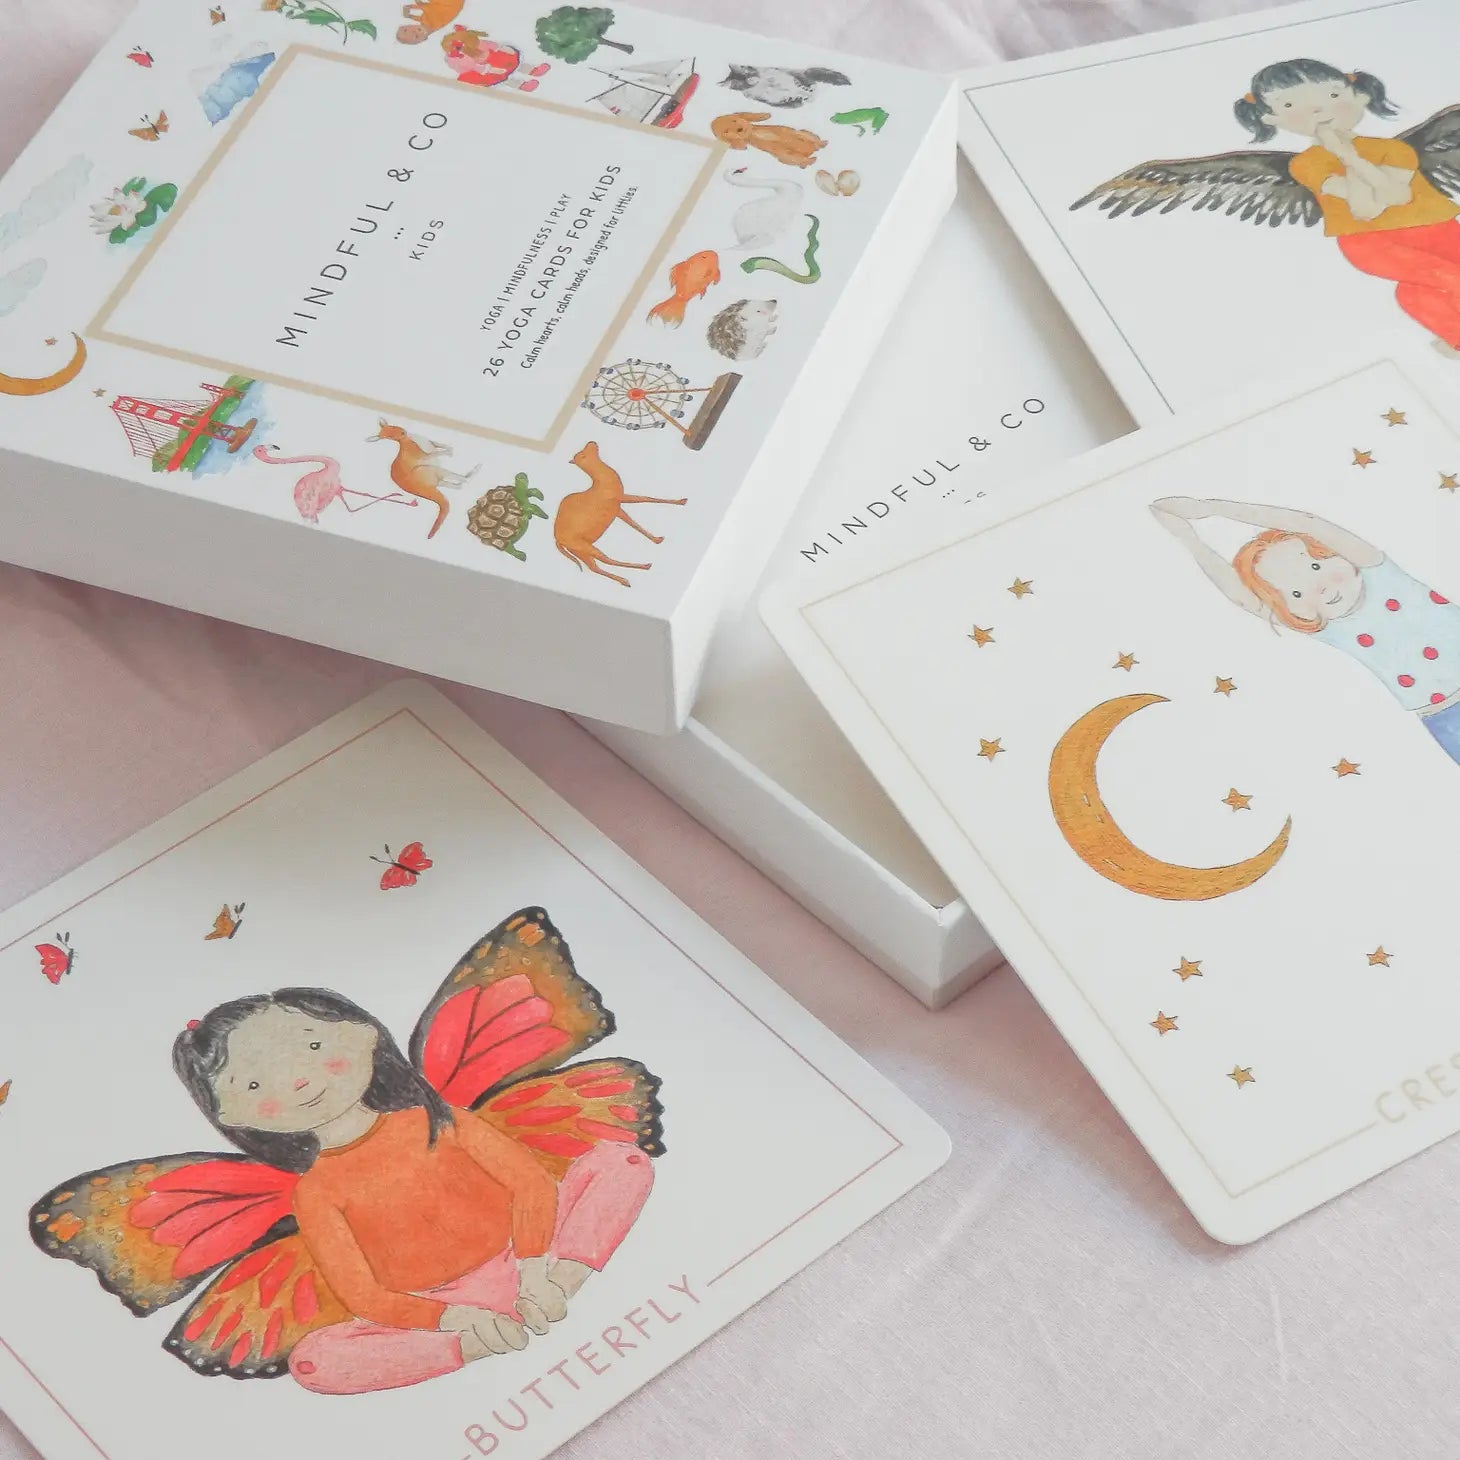 Mindful and Co Kids Yoga Flash Cards available at The Good Life Boutique